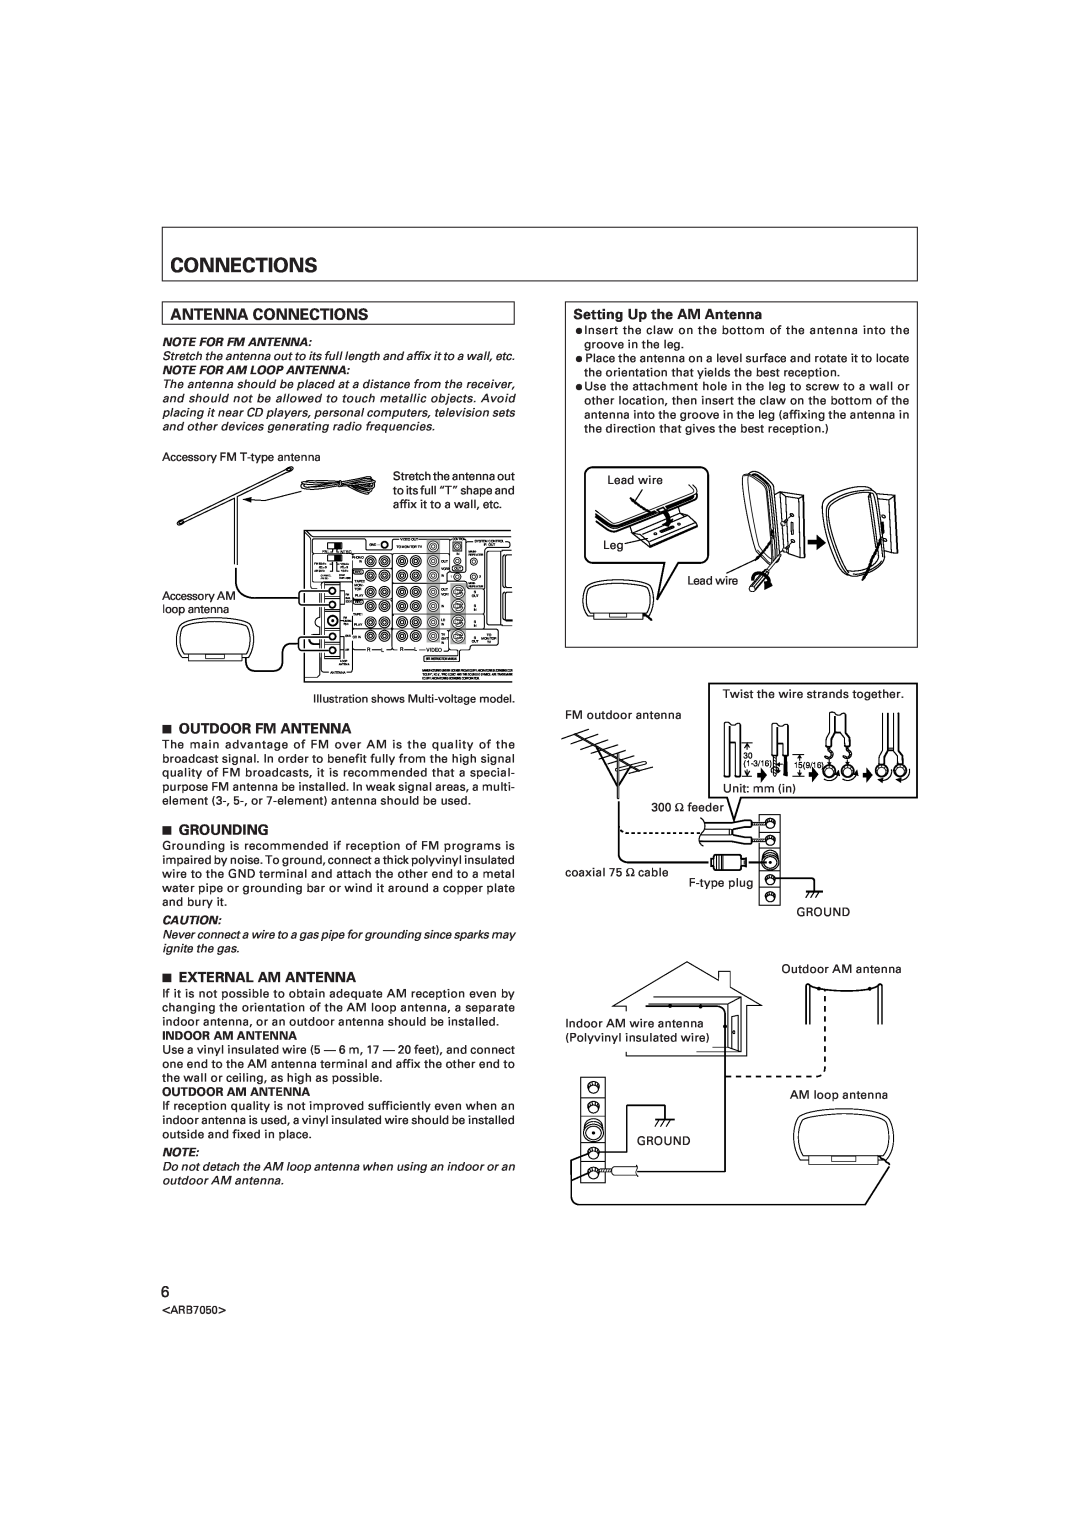 Pioneer VSX-D3S warranty Antenna Connections, Note For Fm Antenna, Note For Am Loop Antenna 